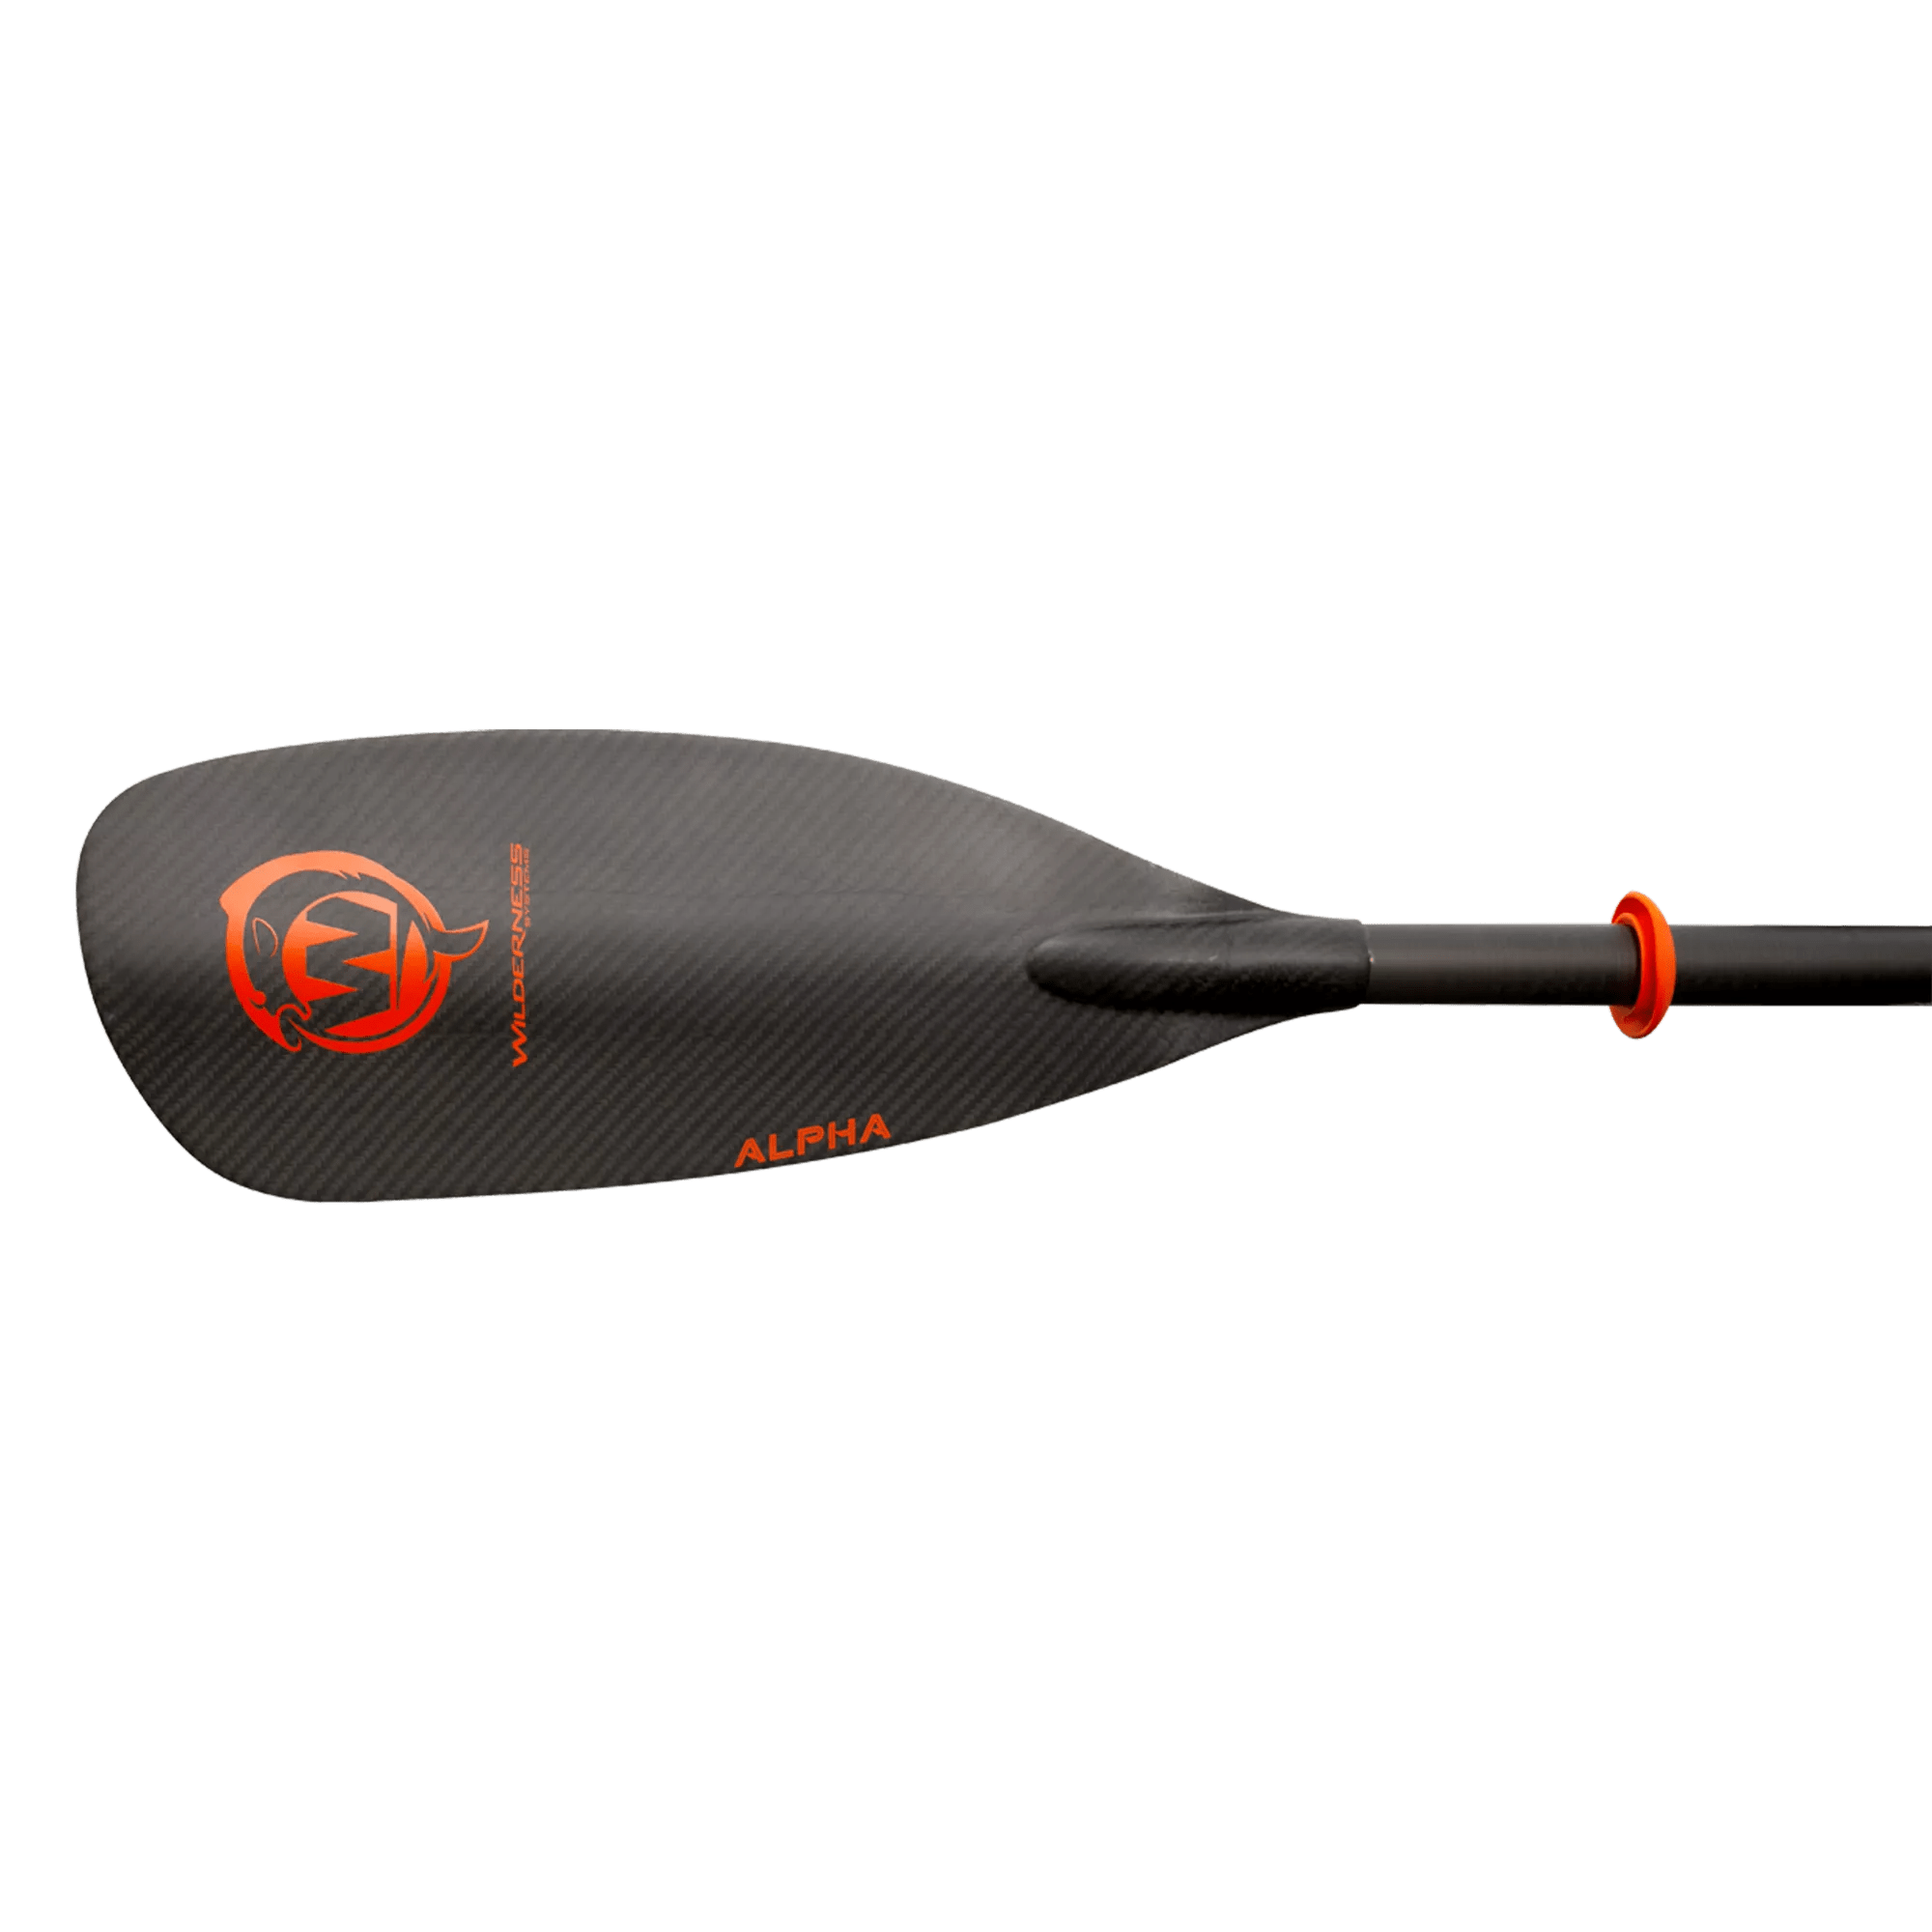 WILDERNESS SYSTEMS - Alpha Carbon Angler Kayak Paddle 240-260 cm - Red - 8070209 - TOP